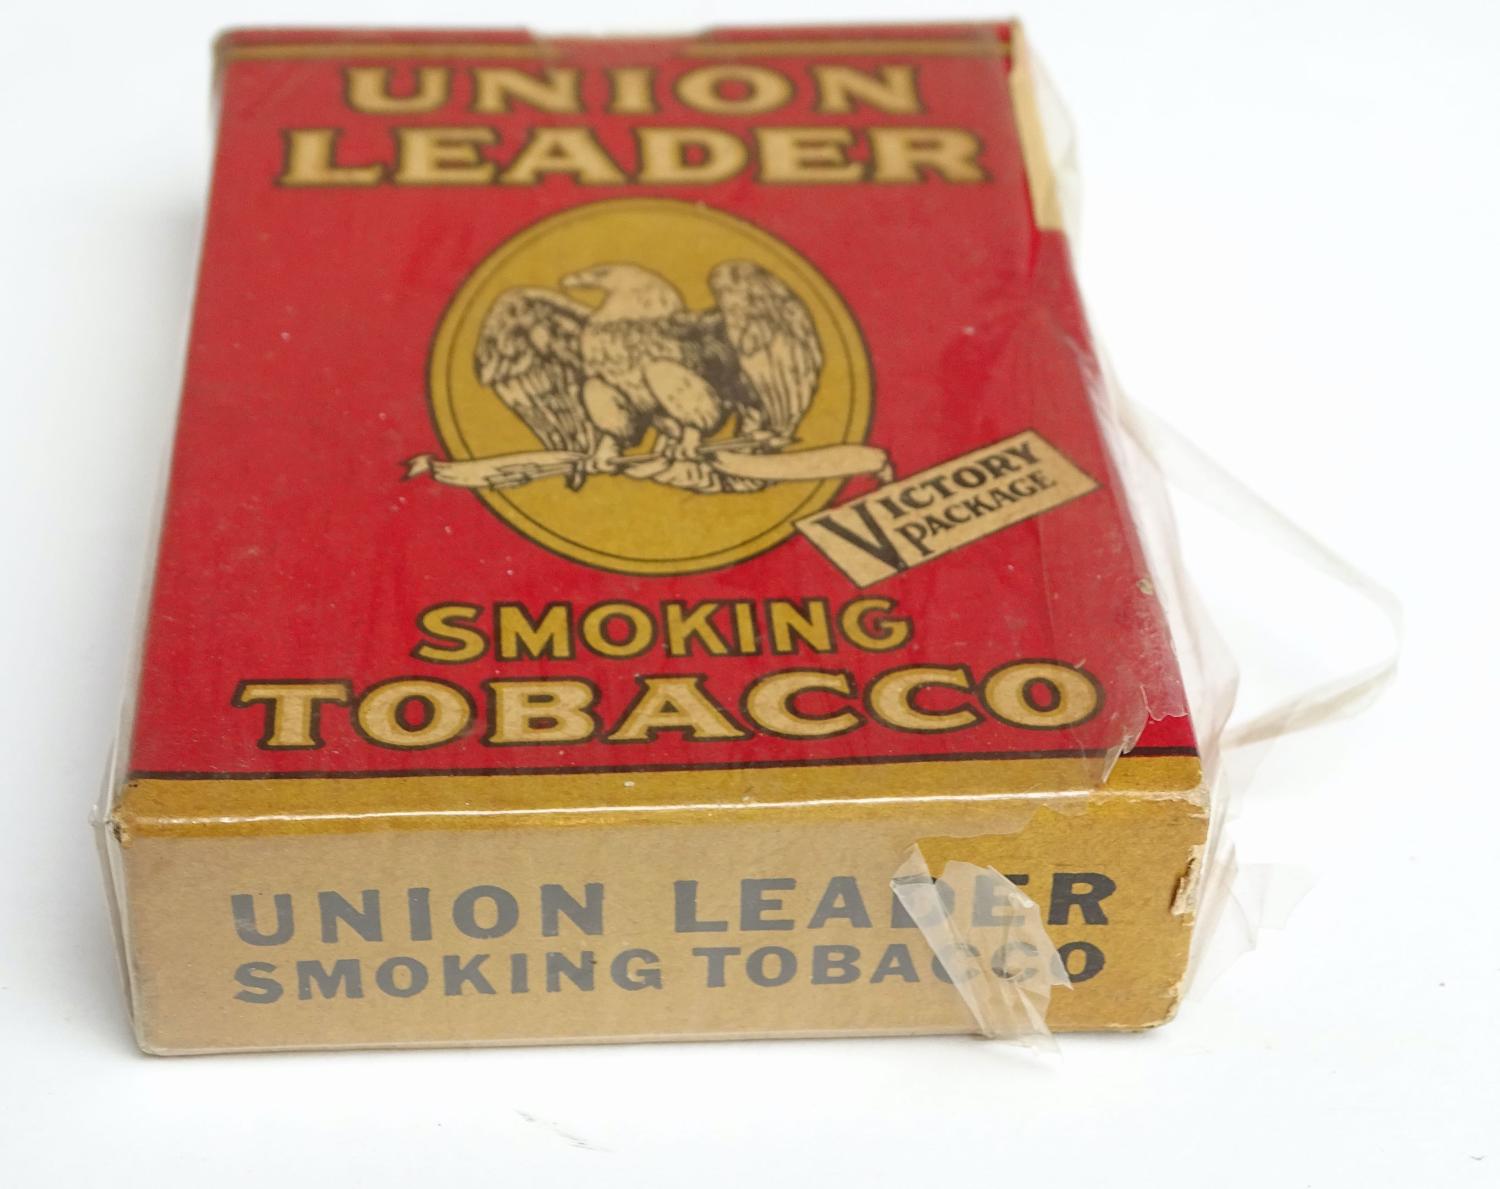 Union Leader Smoking tobacco  Victory Package U.S. Military Forces